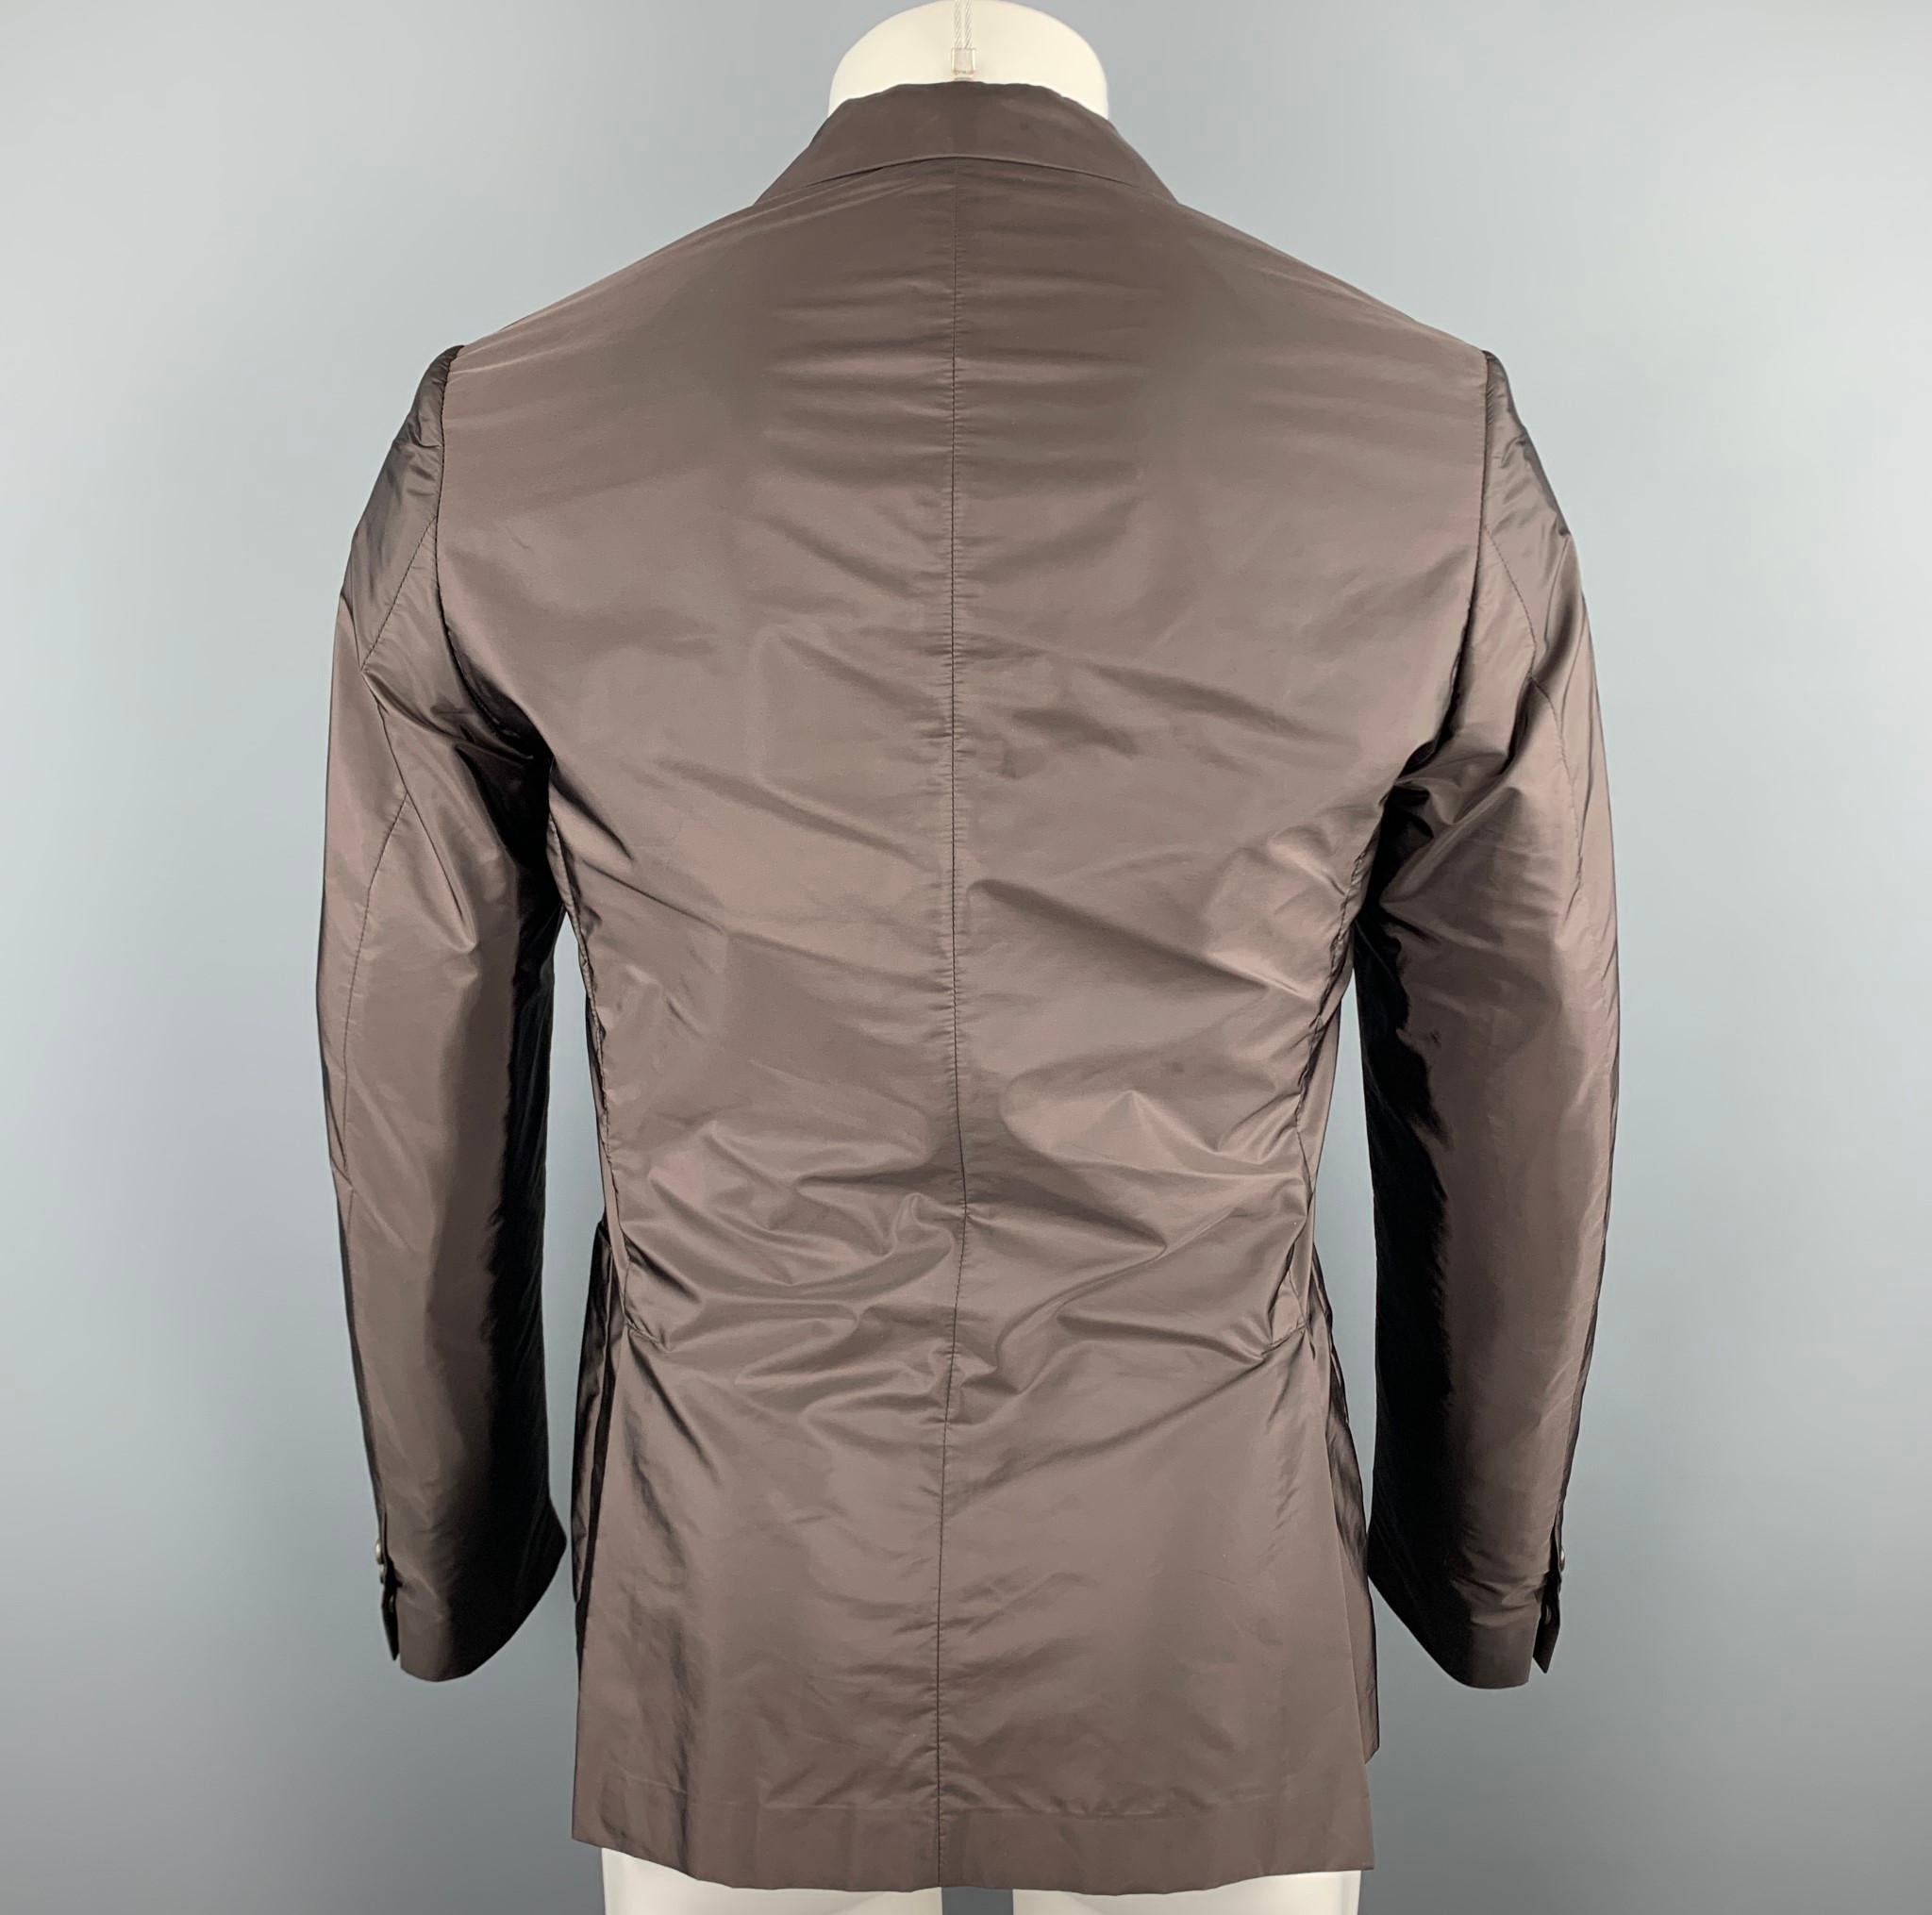 brown polyester jacket